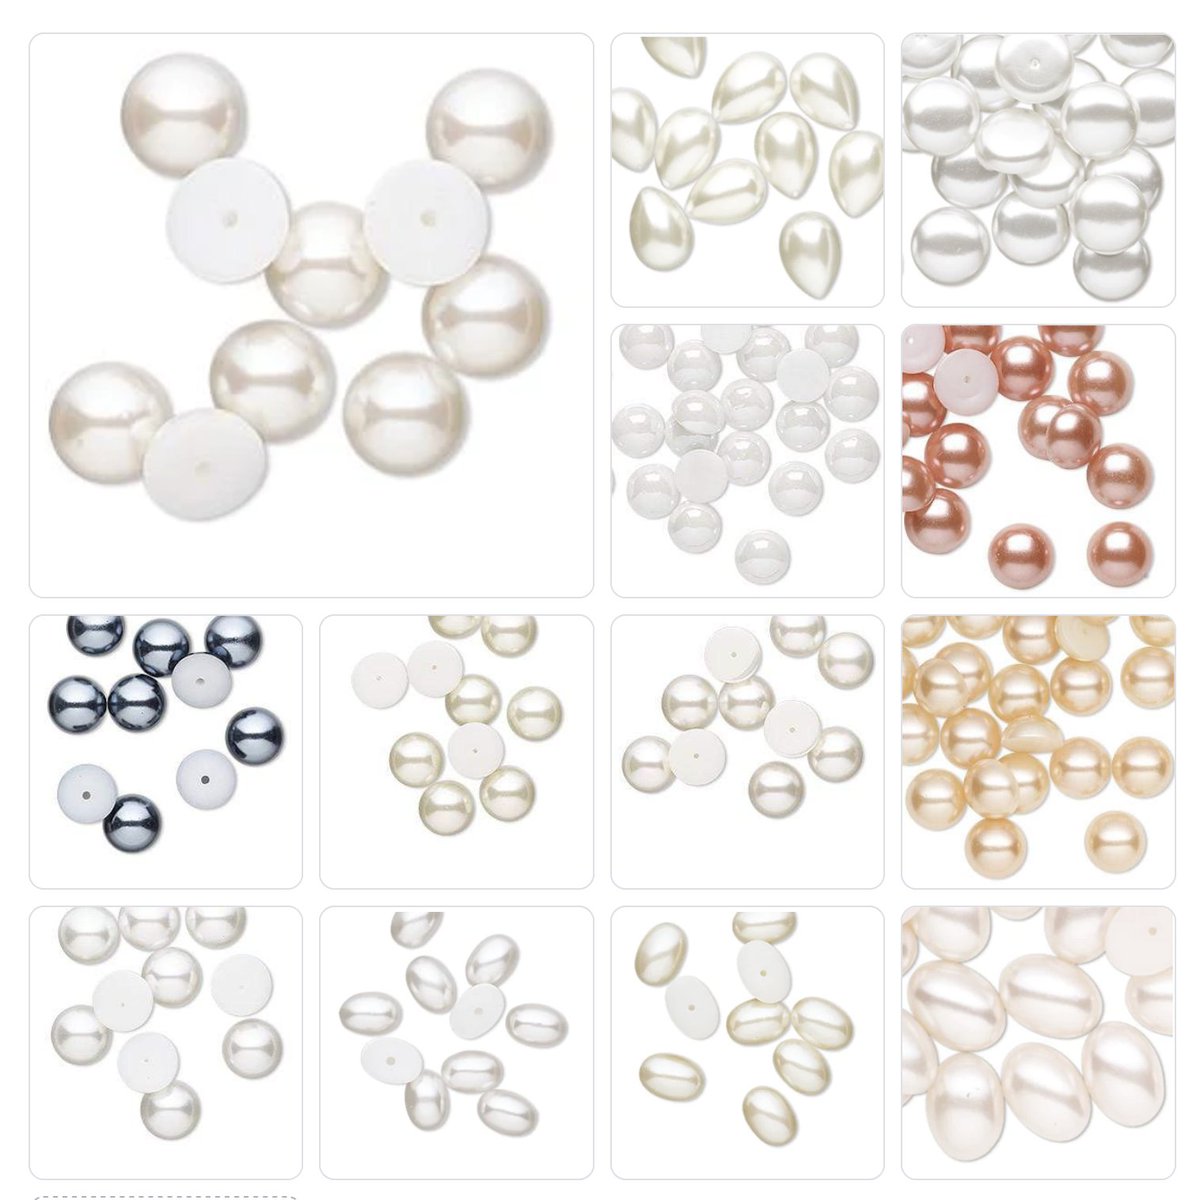 White & Ivory Acrylic Pearl Gems at Sundaylace Creations. Create wedding or prom earrings with these soft white pearls for a touch of elegance.

sundaylacecreations.com/products/acryl…

#beadwork #weddingbeadwork #promearrings #brideearrings #beadedearrings #beadingsupplies #sundaylacecreations